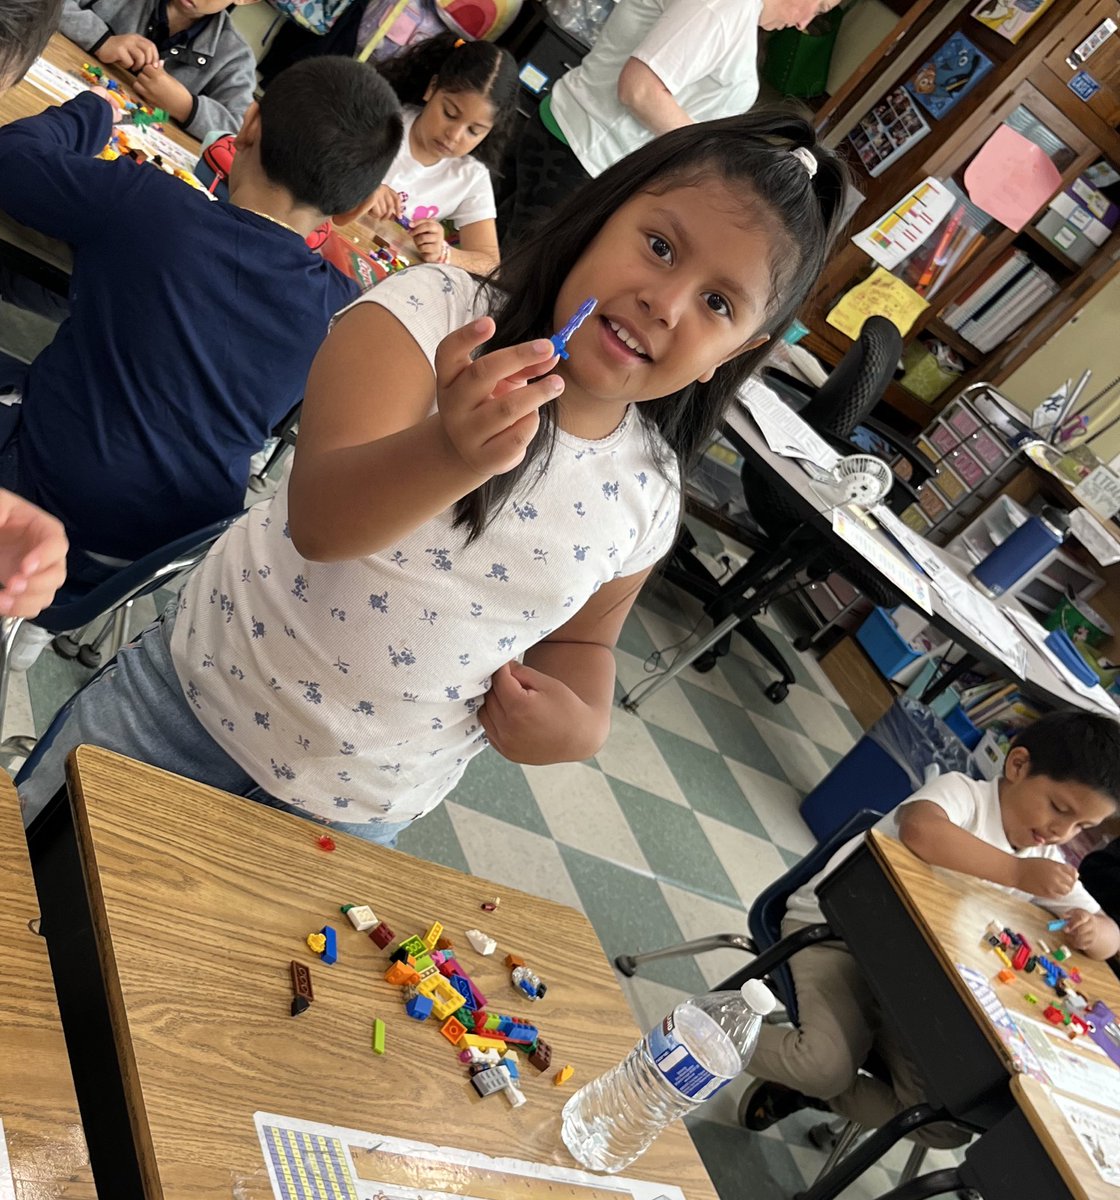 Check out some great #StarWarsDay legos Kindergarten and First Grade @s4_belleville & @S8_Belleville created this week in the Media Center! @school4_dc @8Principal @missmacbps